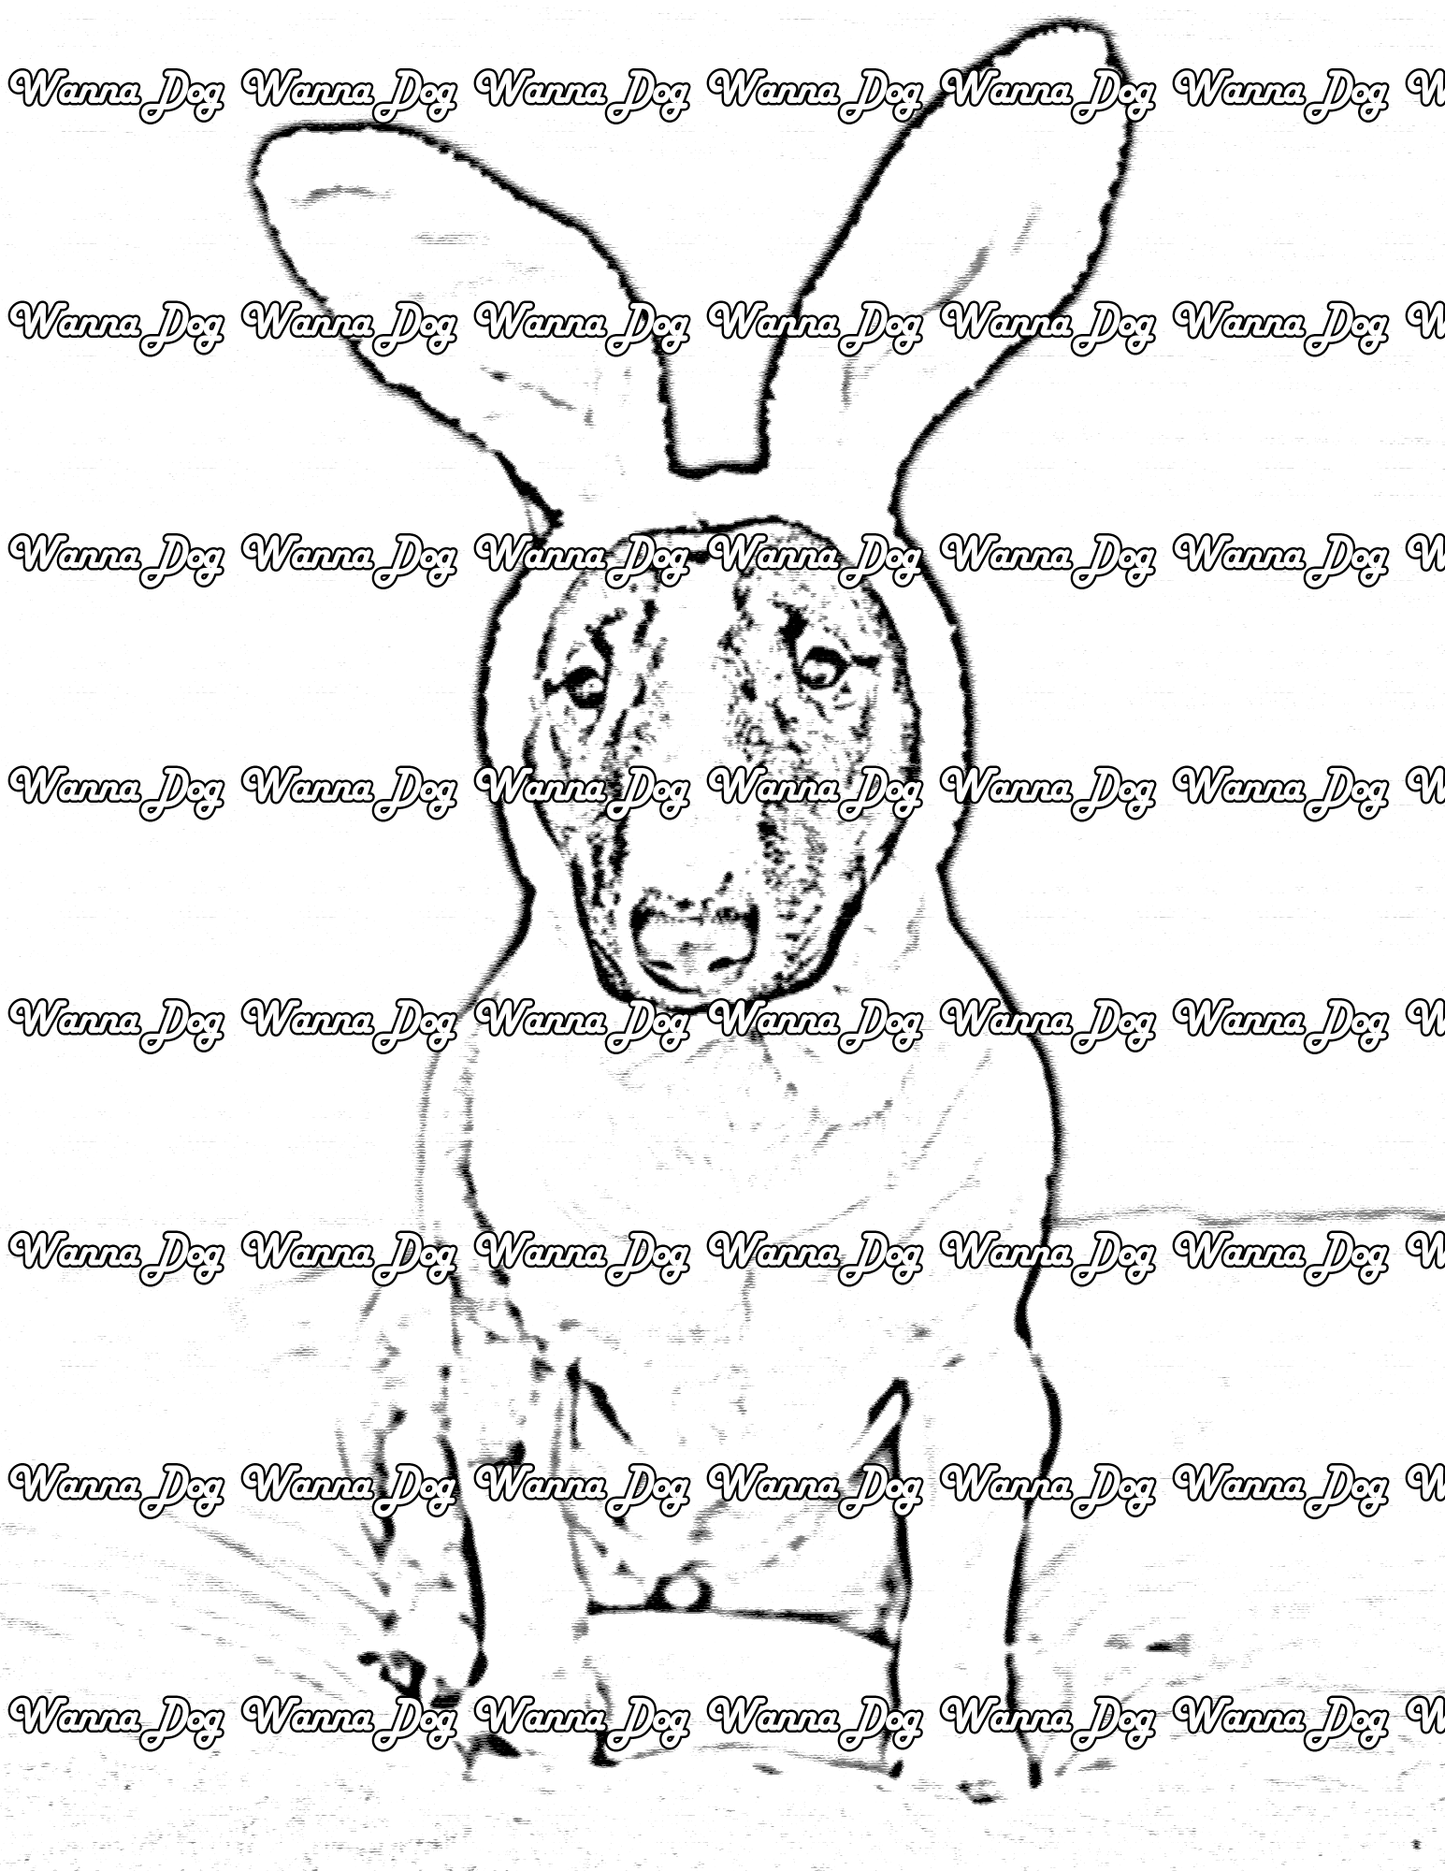 Bull Terrier Coloring Page of a Bull Terrier wearing bunny ears